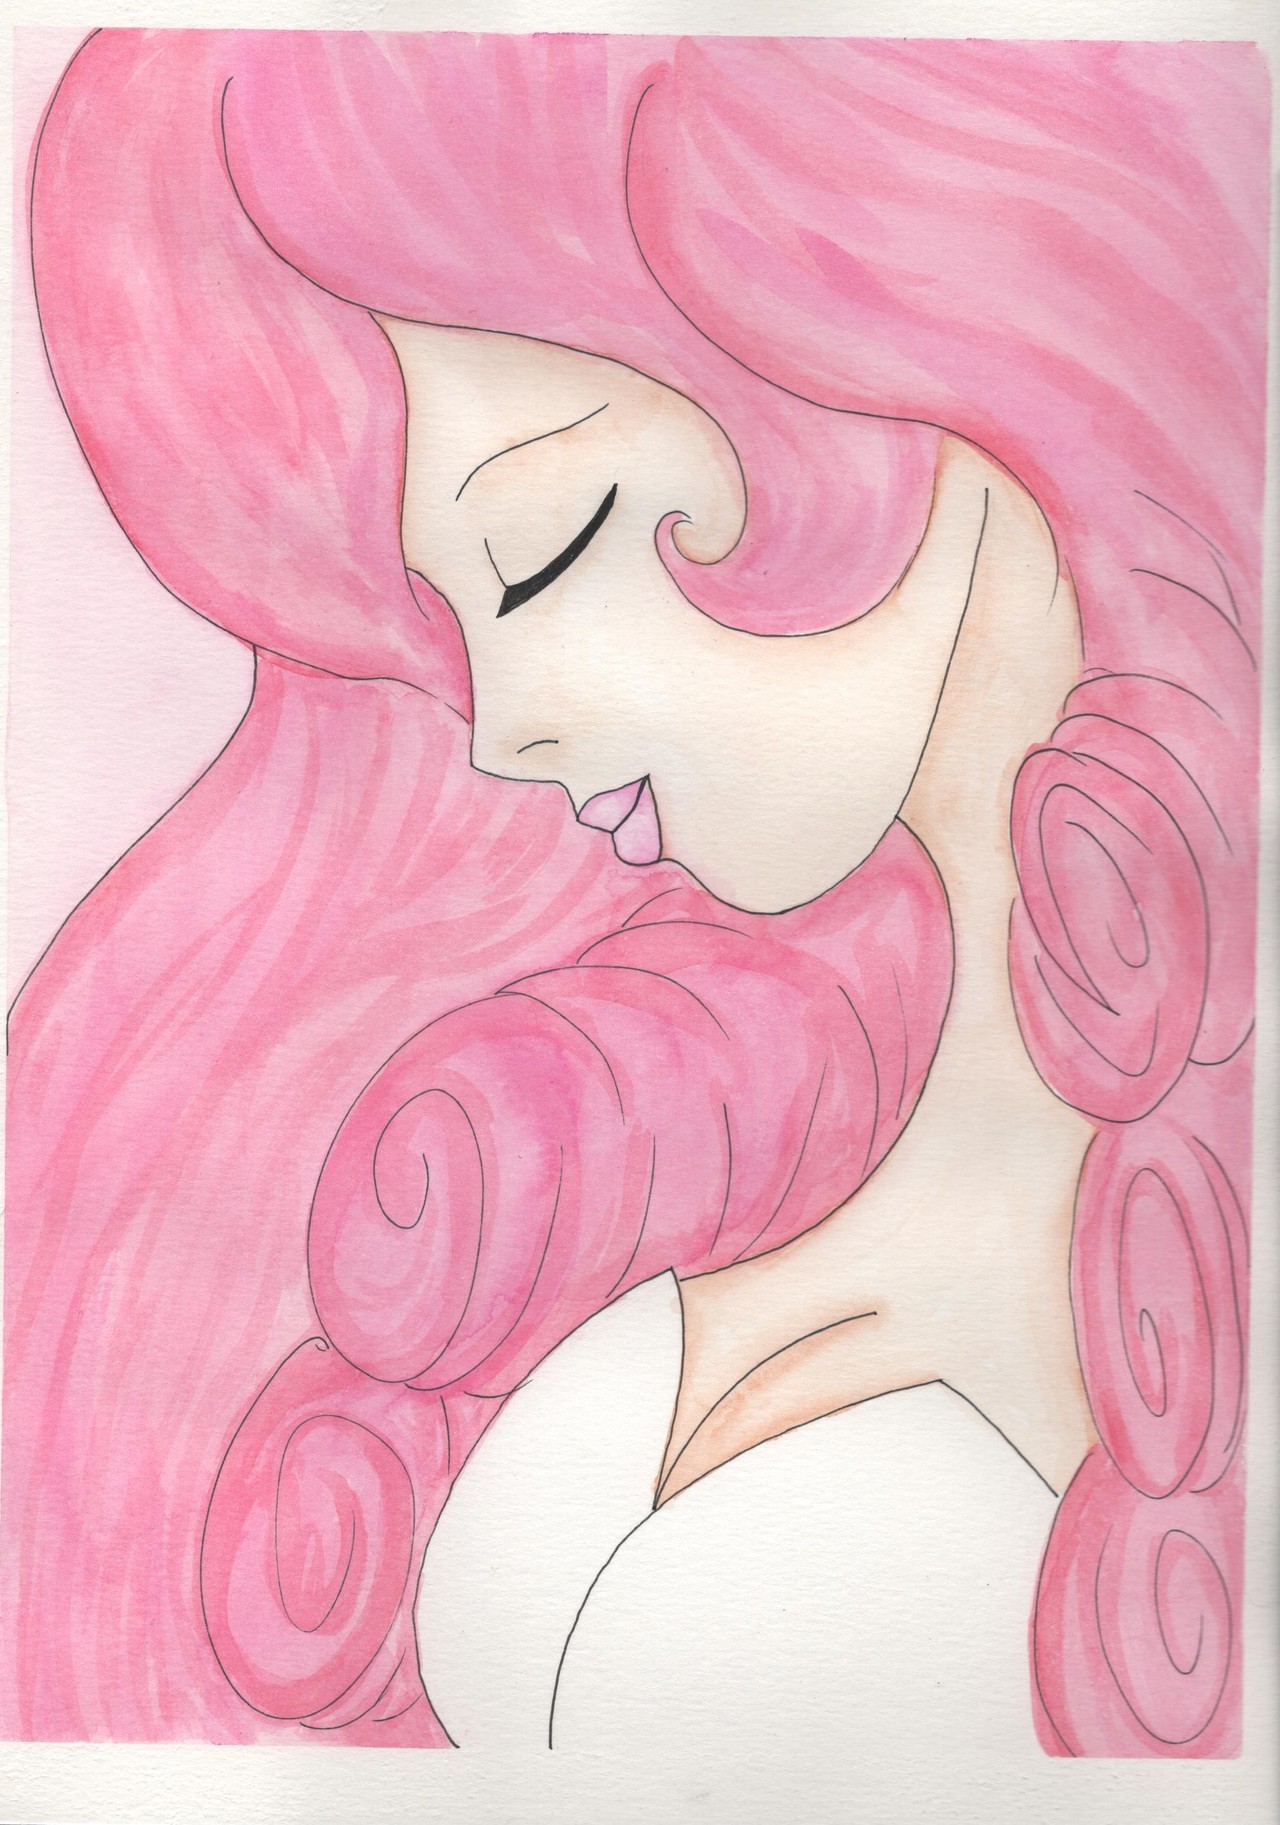 First painting with my St Petersburg White Knights watercolor paints, yeah I need more practice…